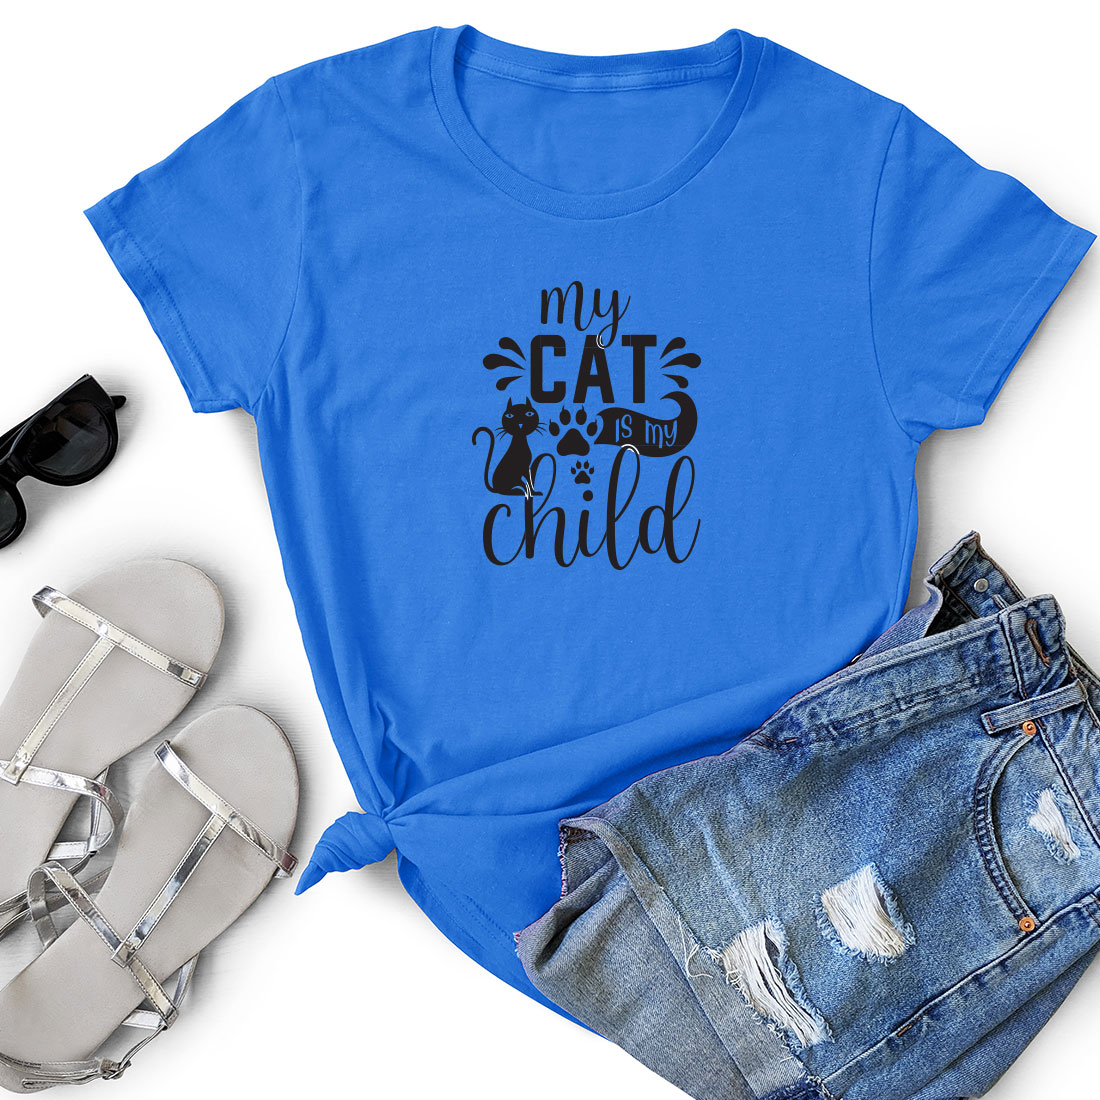 T - shirt that says my cat is my child next to a pair of.